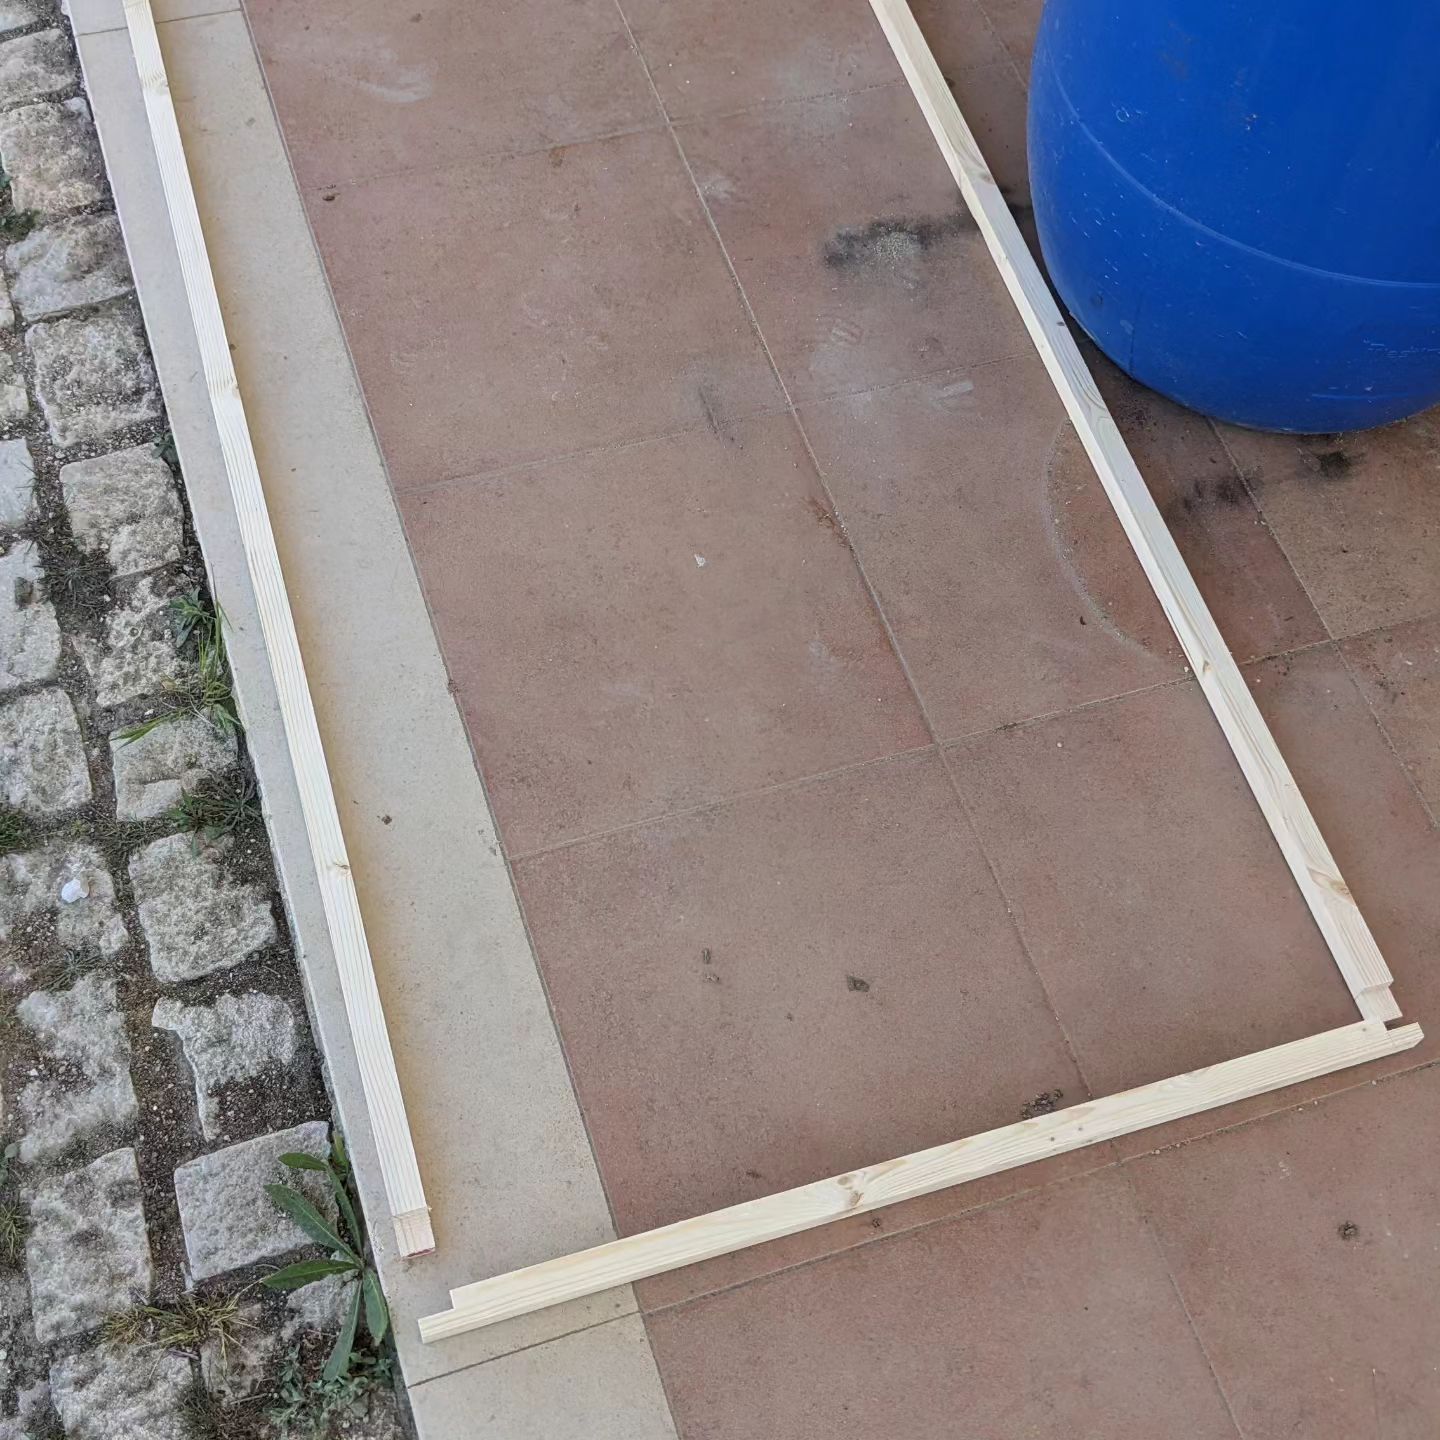 Started to make a door for the new bird house